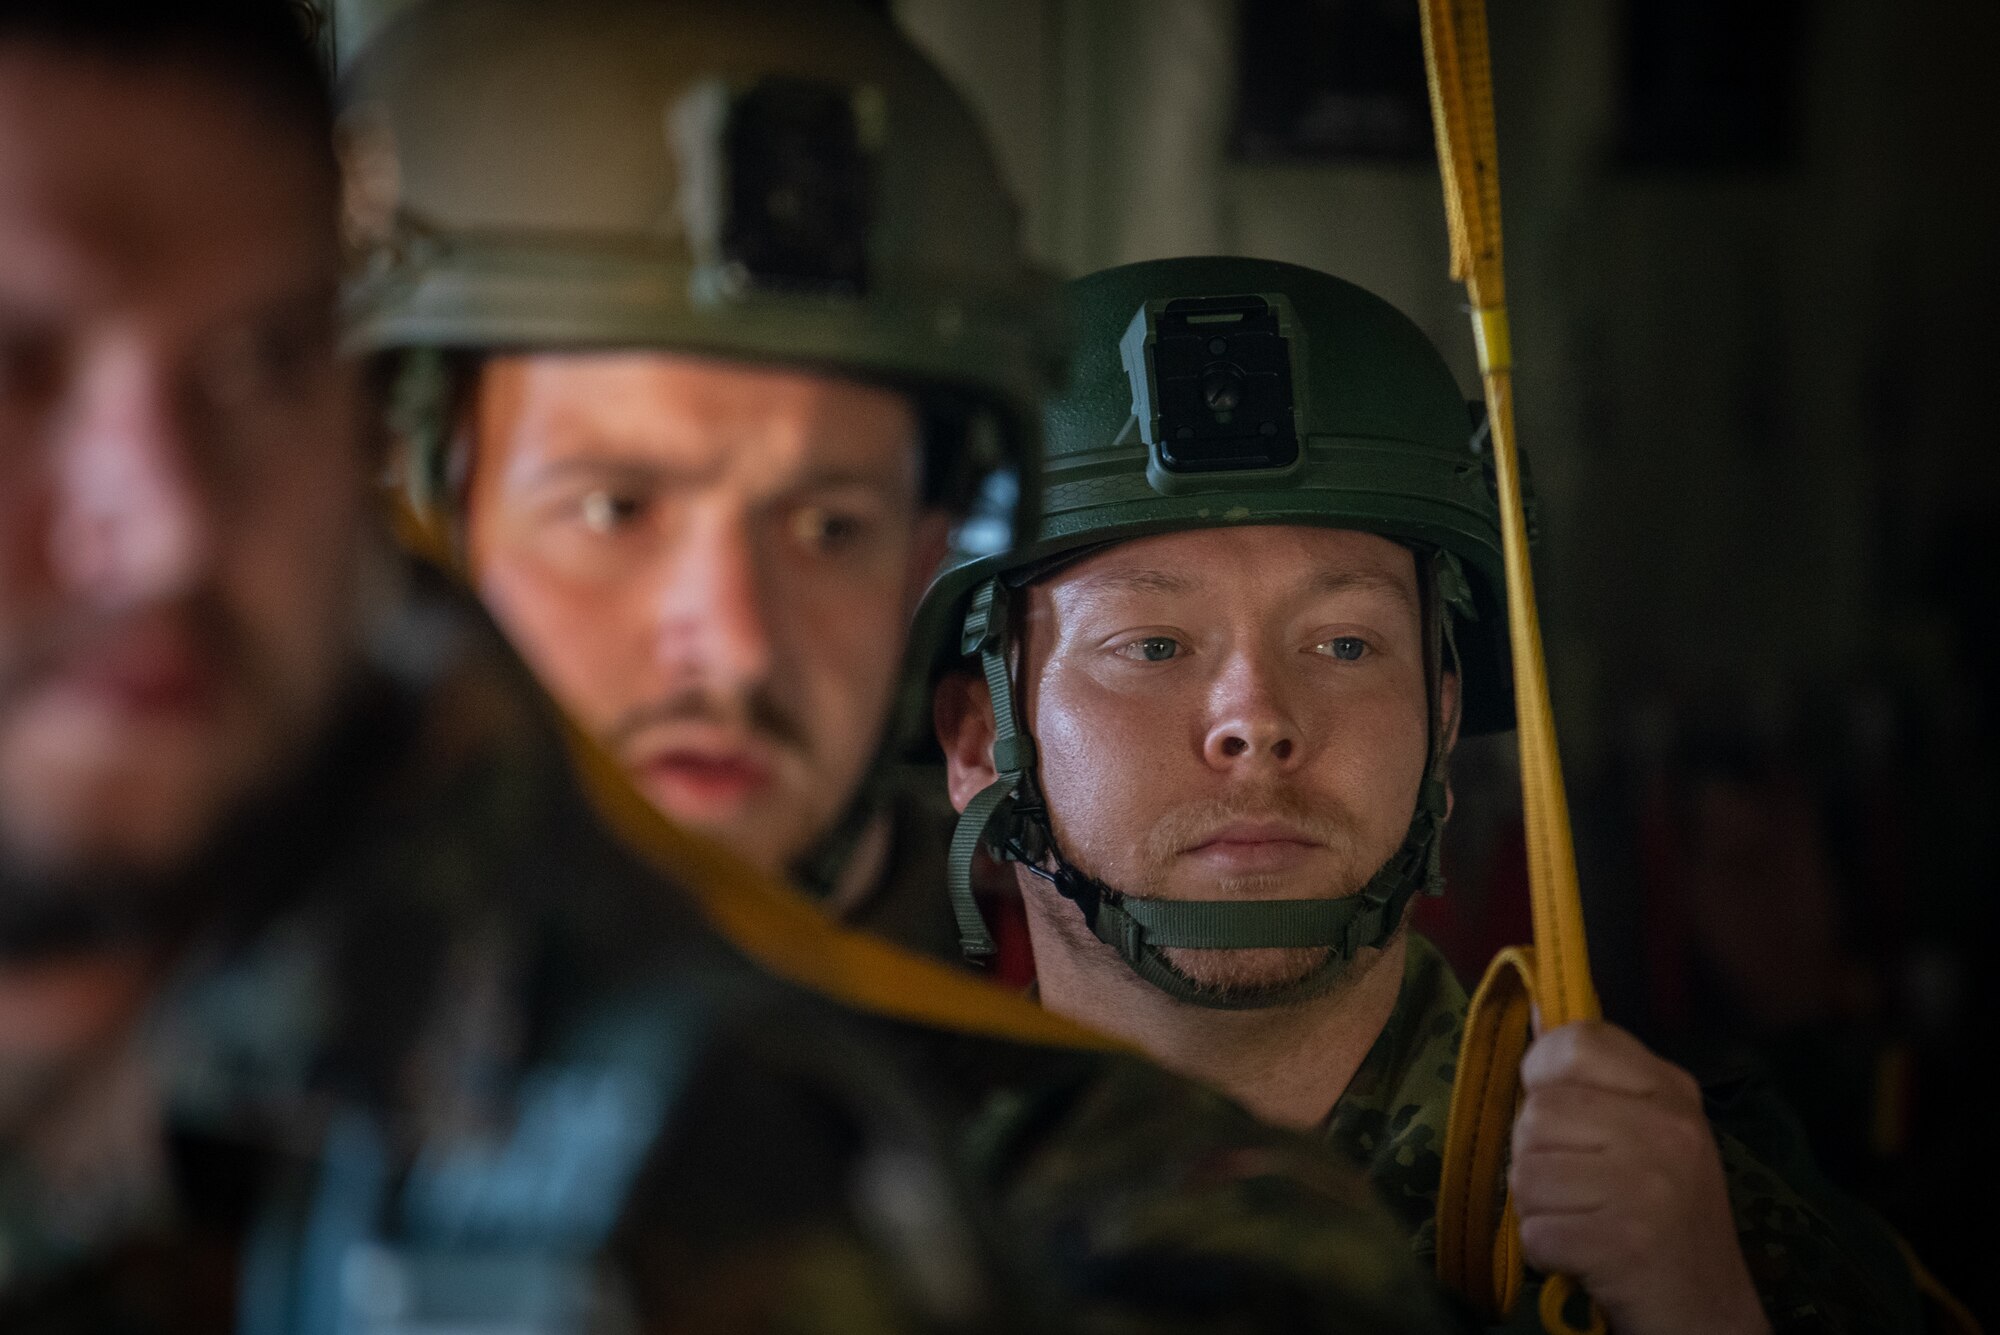 German paratroopers prepare to jump from a 123rd Airlift Wing C-130J Super Hercules during exercise Air Defender 2023 in Saarbrucken, Germany, June 15, 2023. AD23 integrates both U.S. and allied air-power to defend shared values, while leveraging and strengthening vital partnerships to deter aggression around the world. (U.S. Air National Guard photo by Master Sgt. Phil Speck)